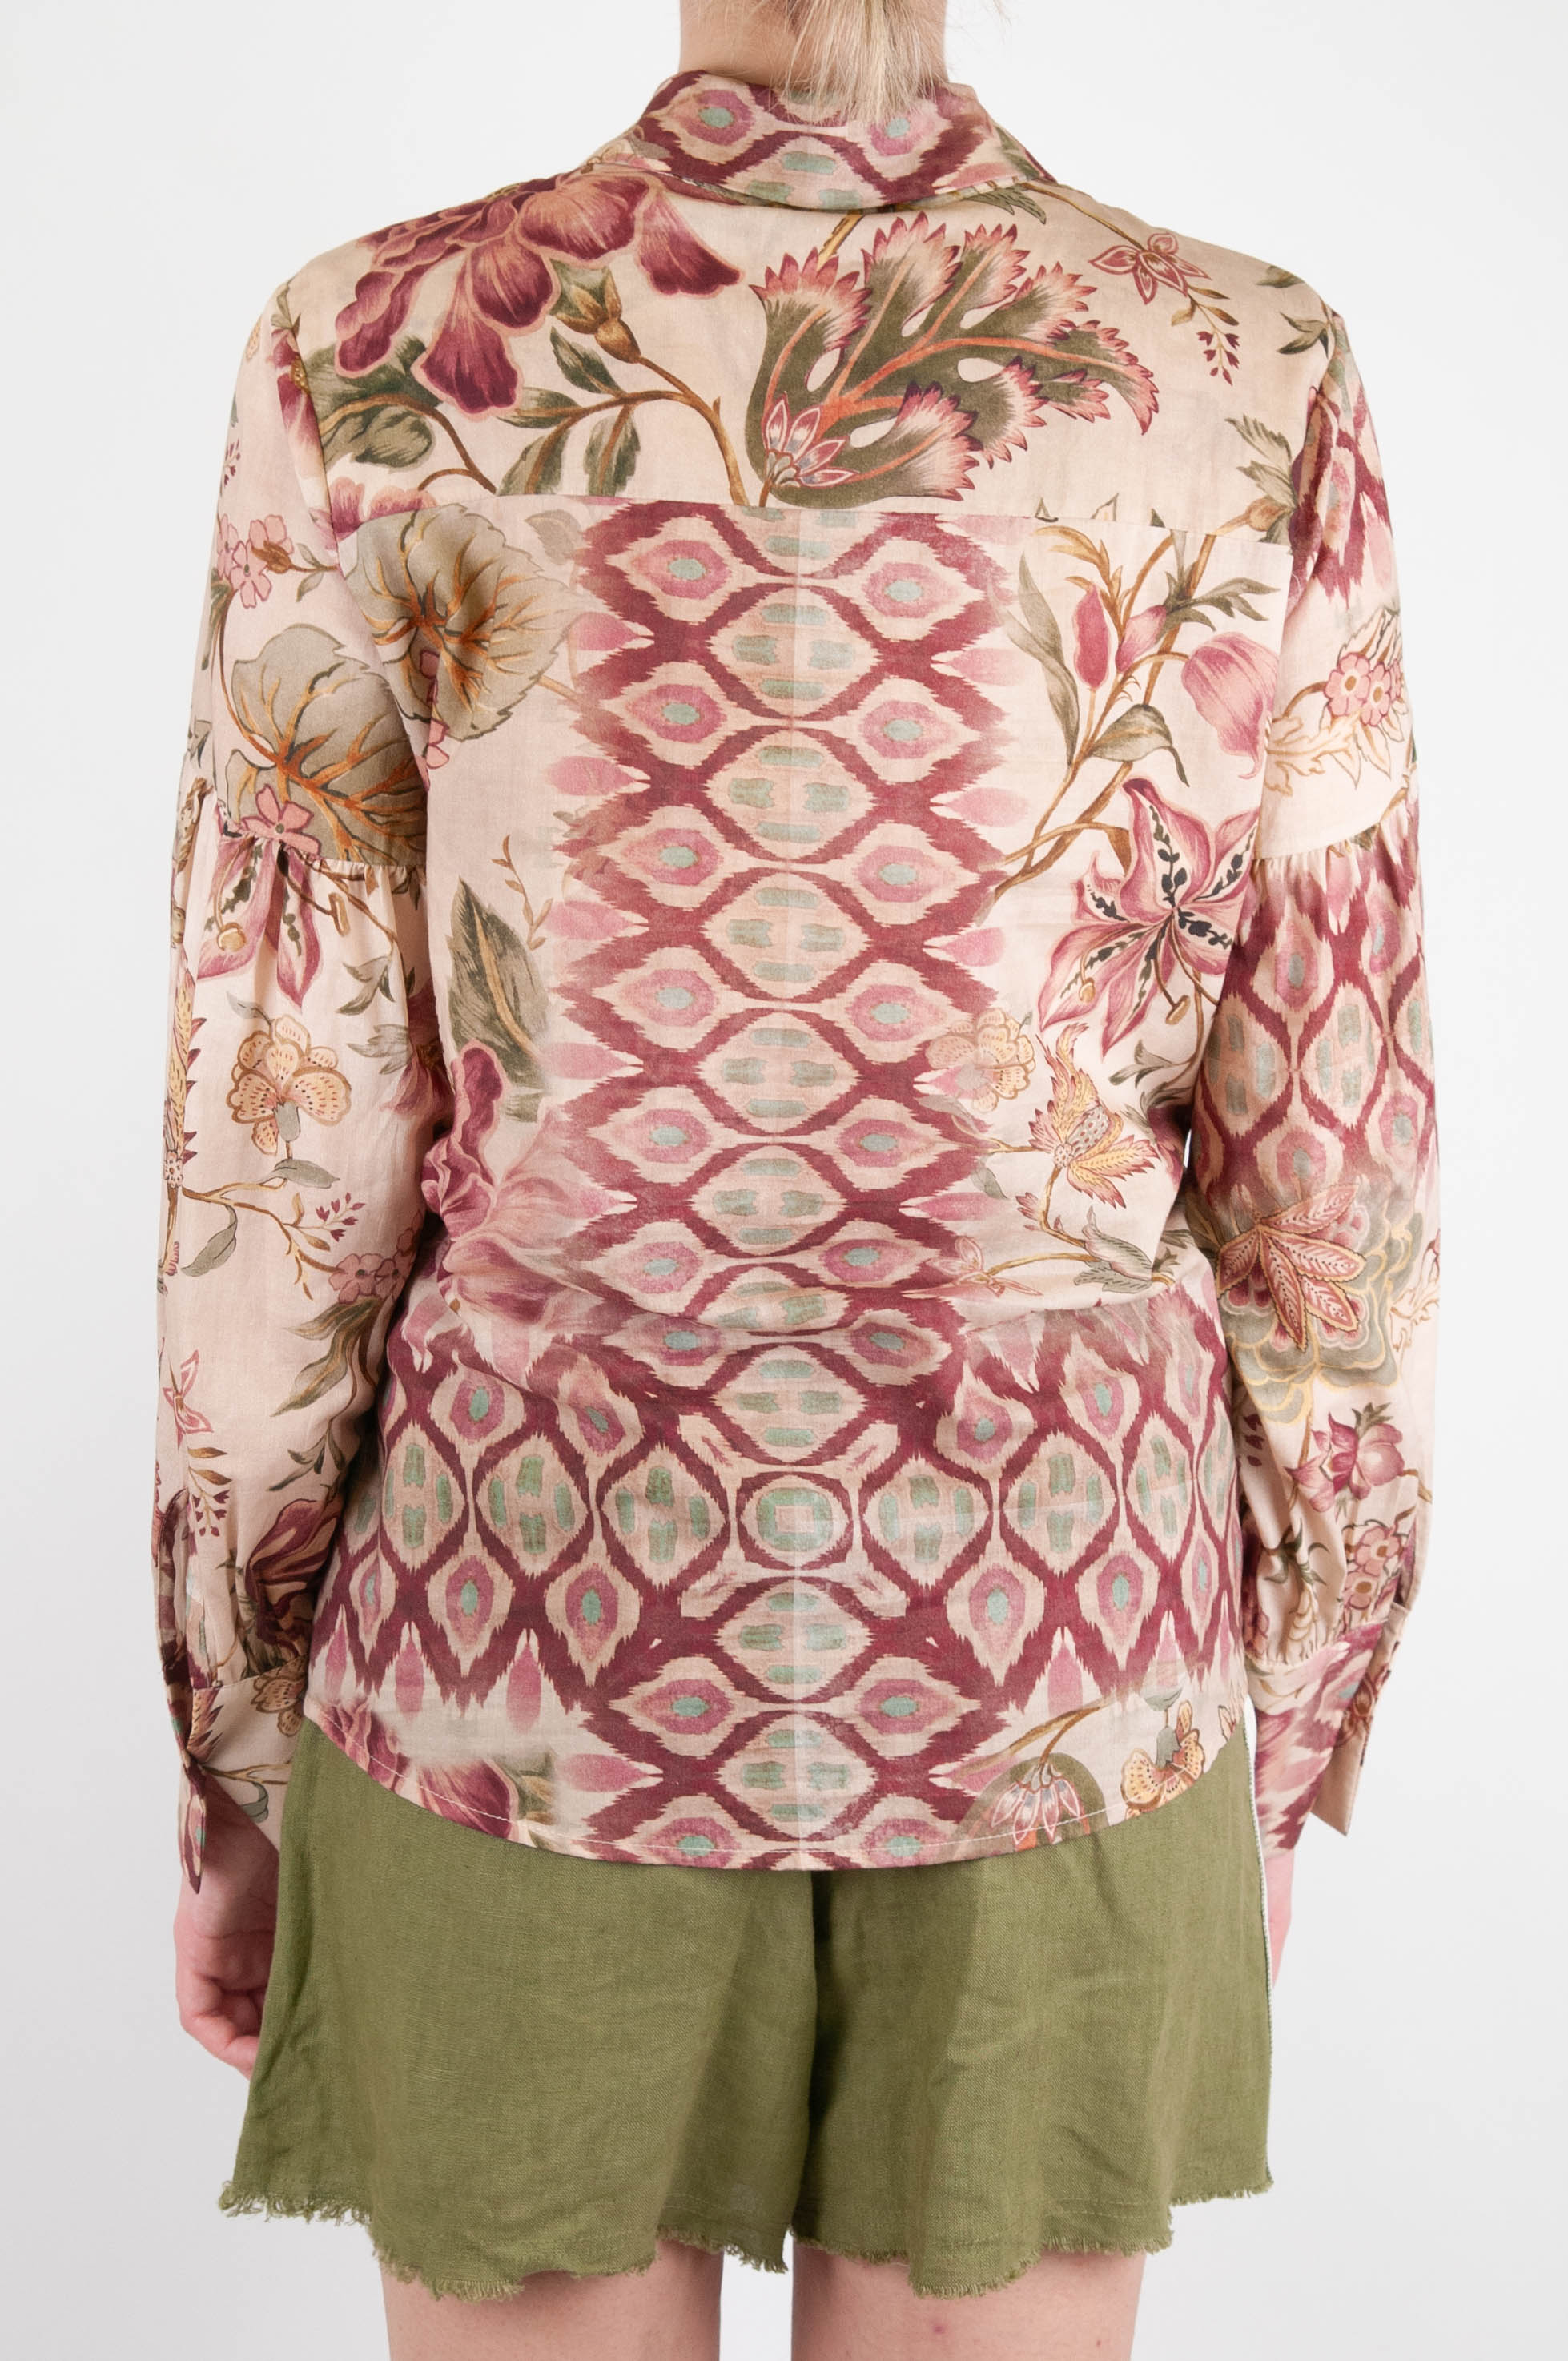 Tension in - Abstract floral patterned shirt in cotton muslin